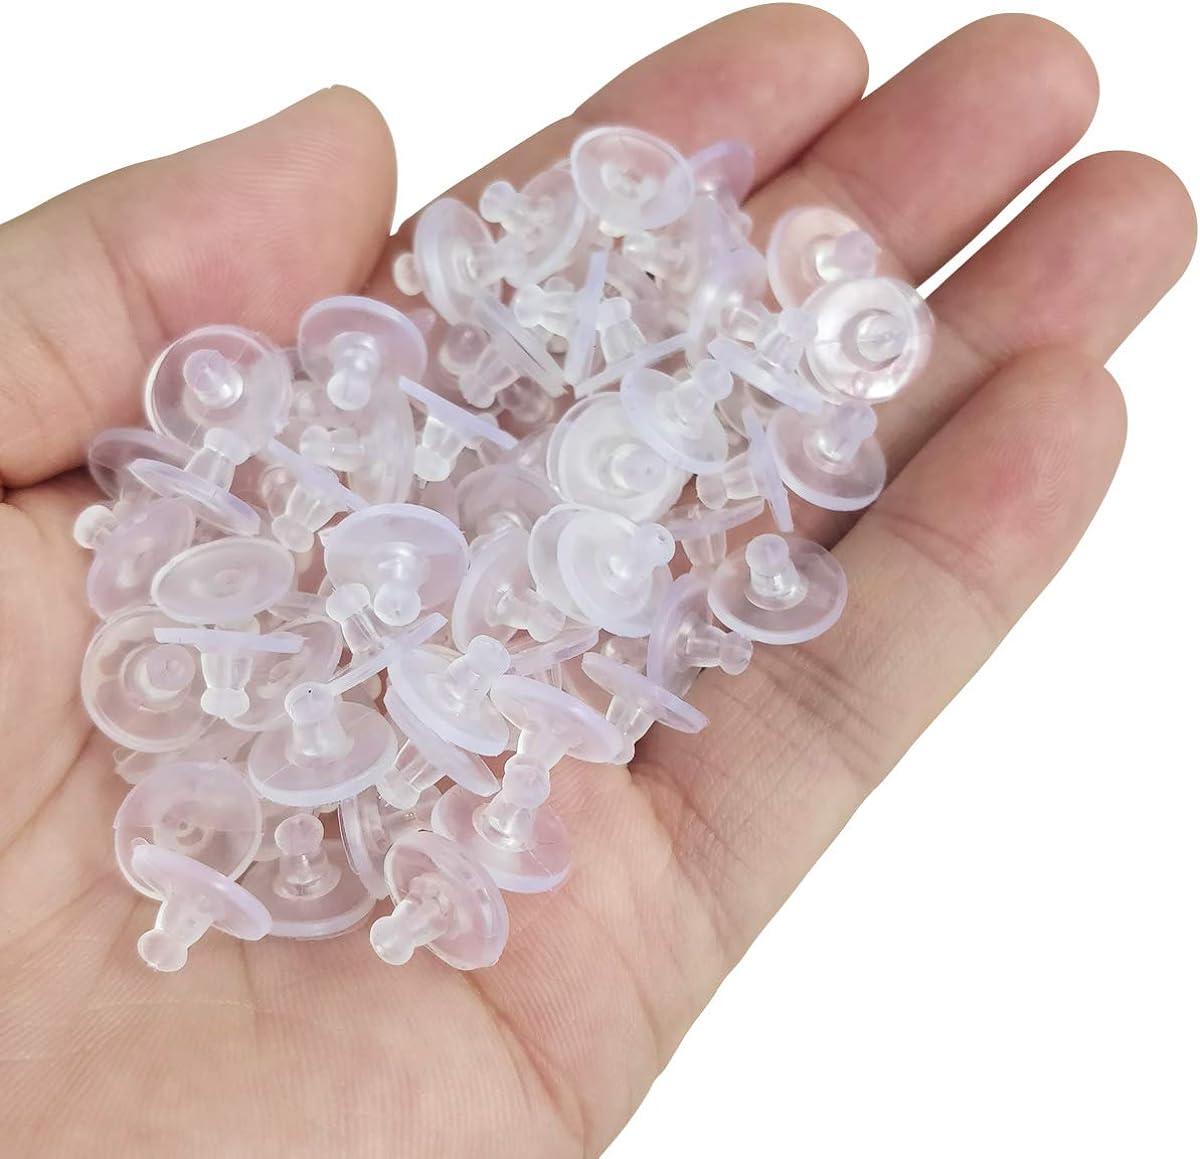 Earring Backings Silicone Rubber 50x Ear Safety Pads Replacement